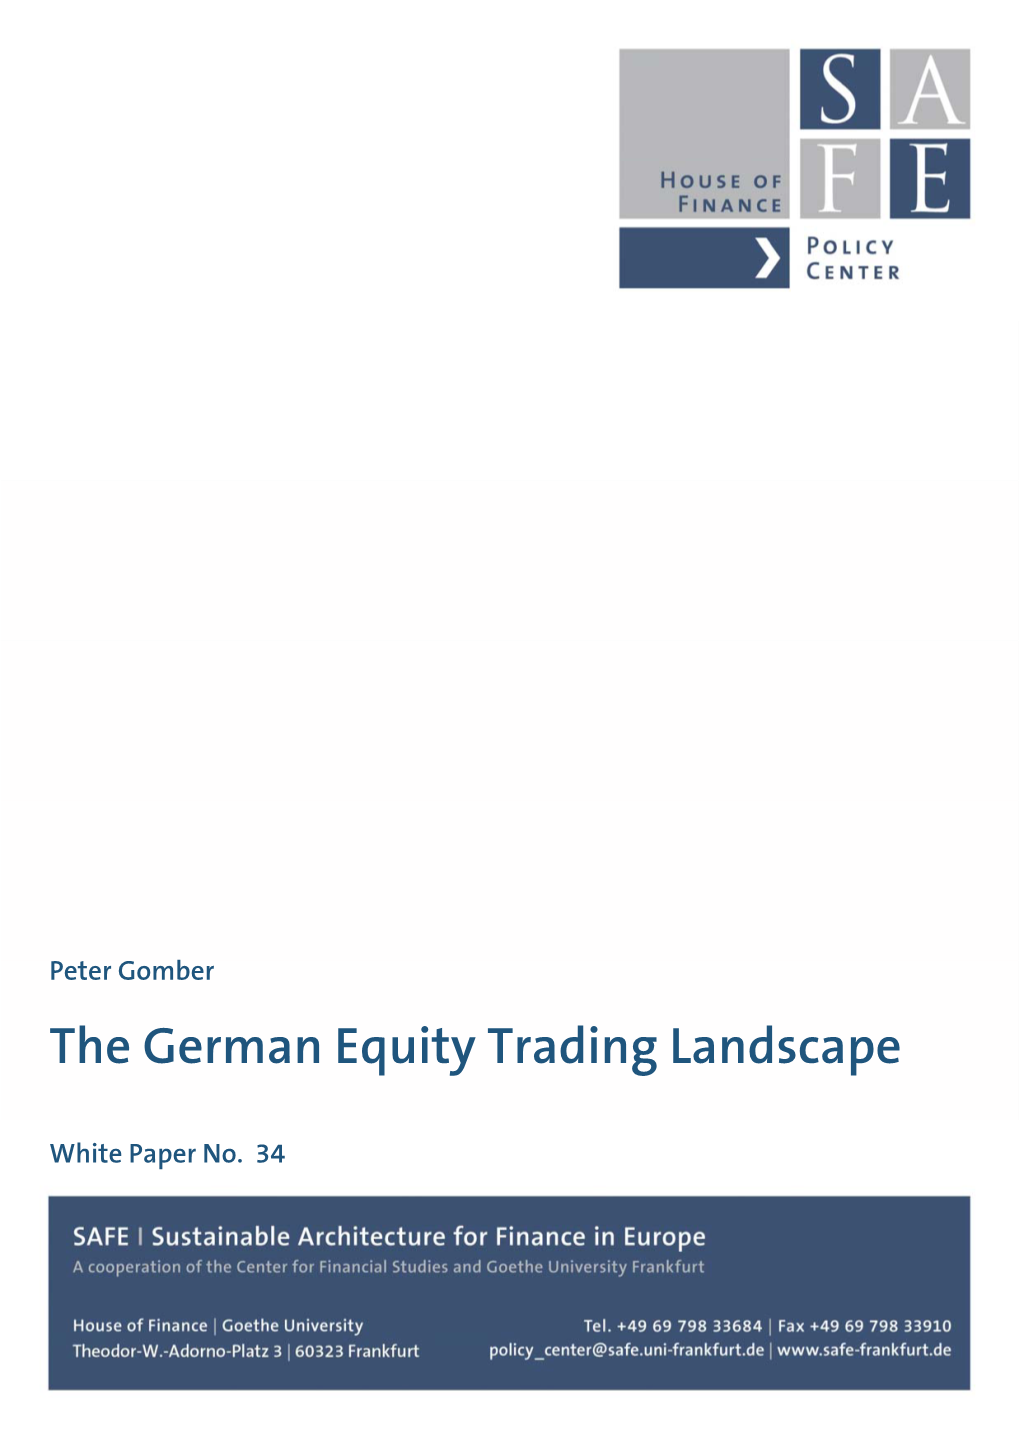 The German Equity Trading Landscape